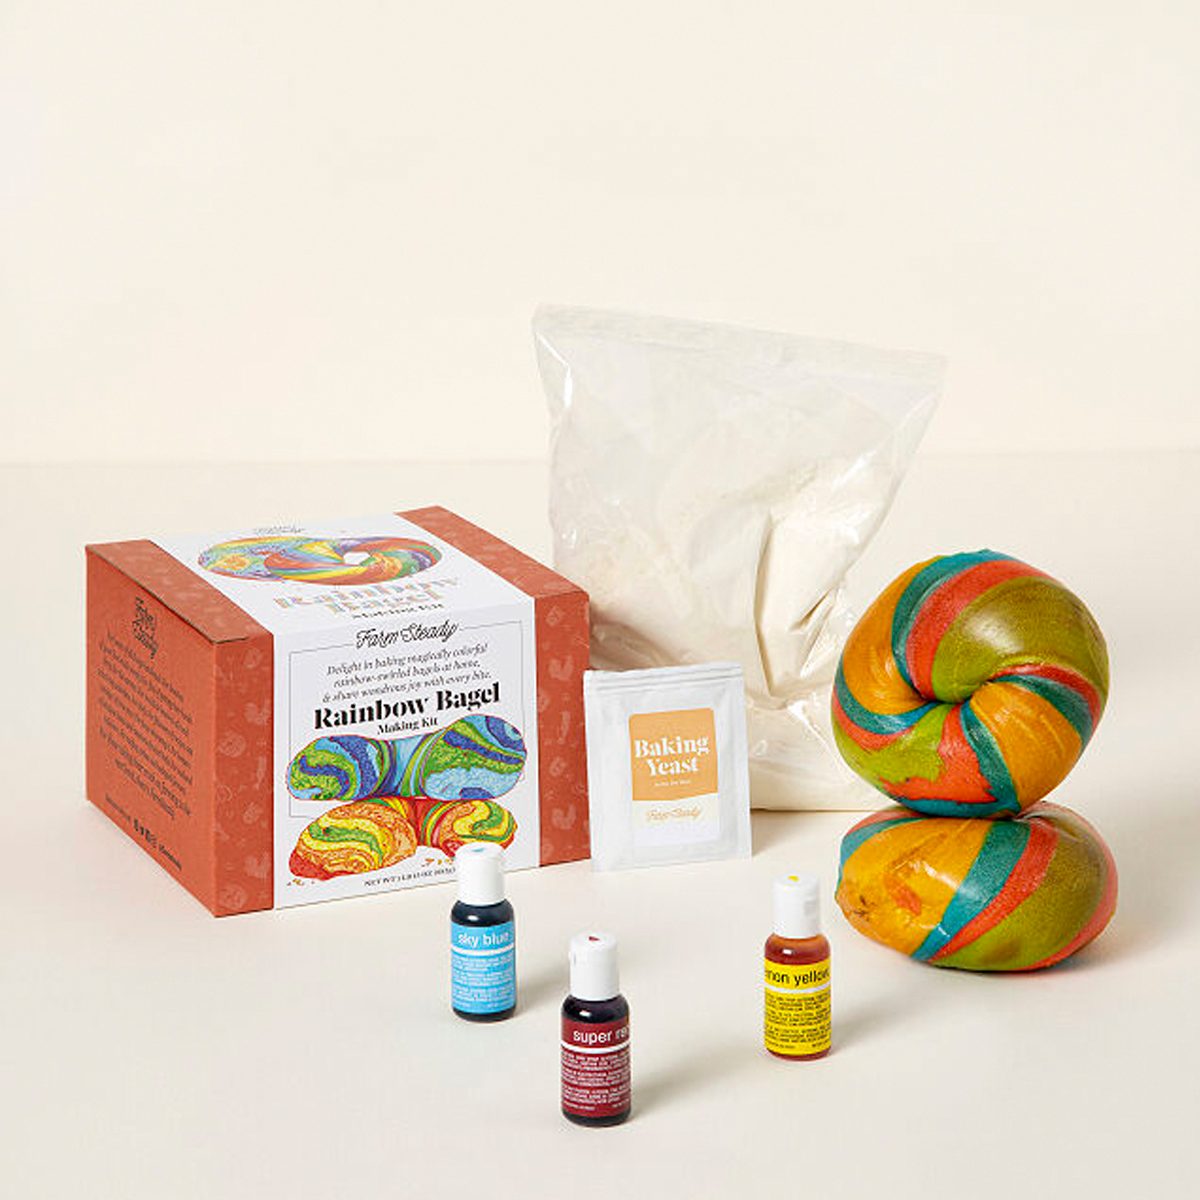 back to school gifts for students Make Your Own Rainbow Bagel Kit